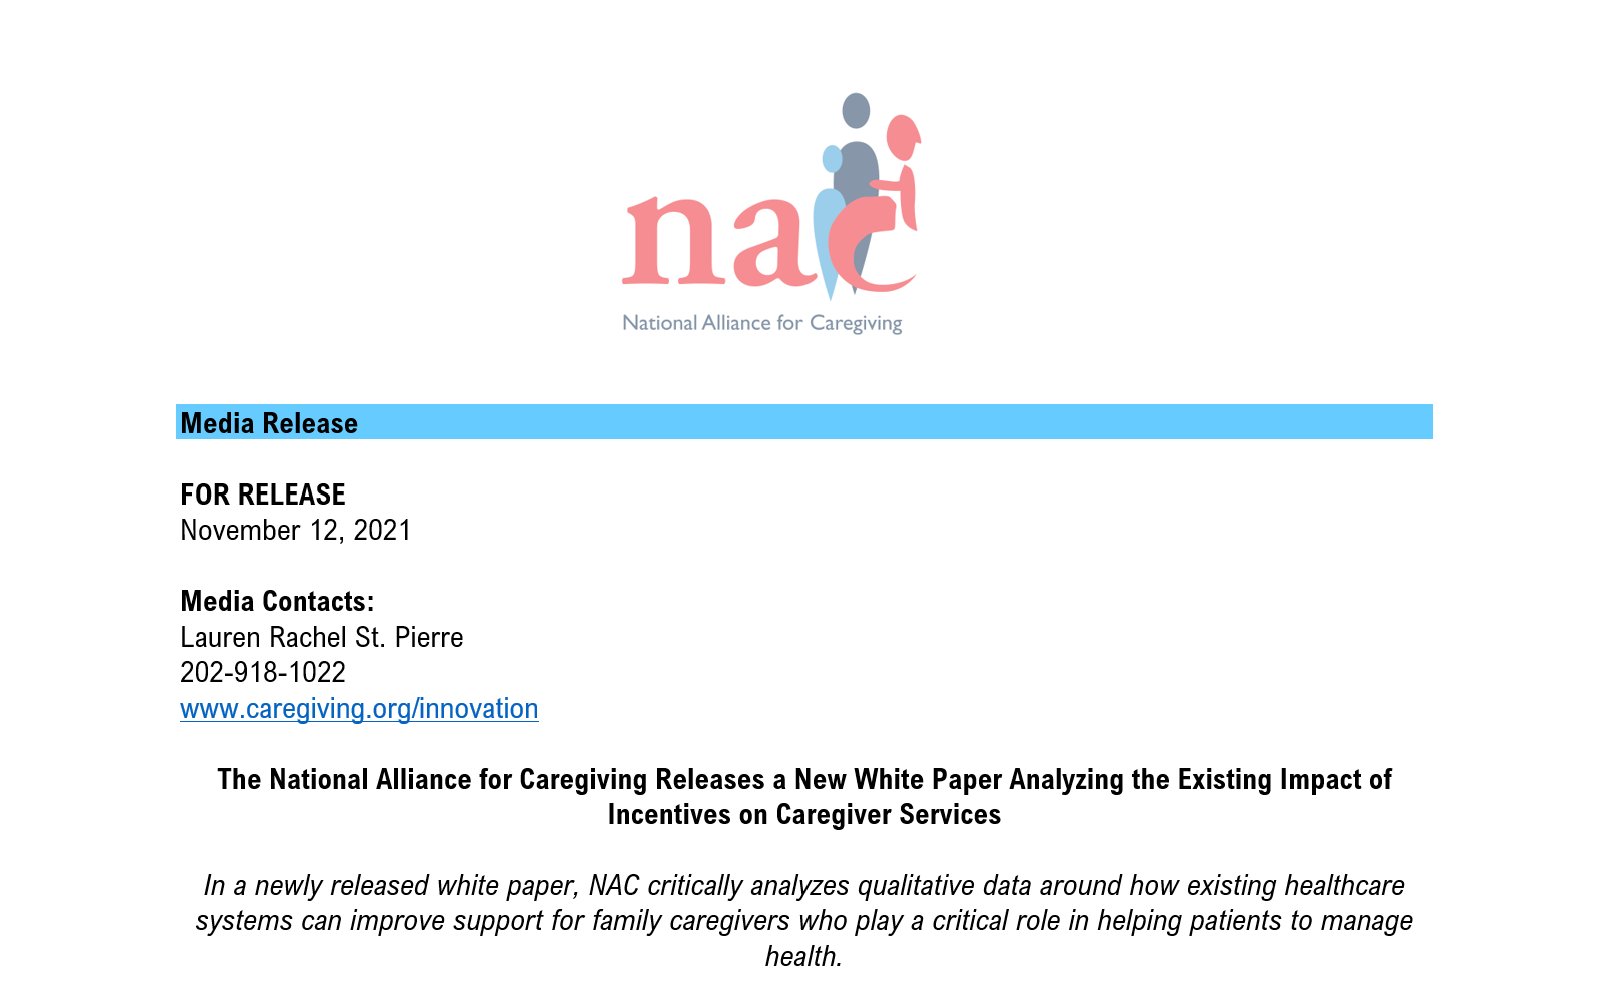 The National Alliance for Caregiving Releases a New White Paper Analyzing the Existing Impact of Incentives on Caregiver Services